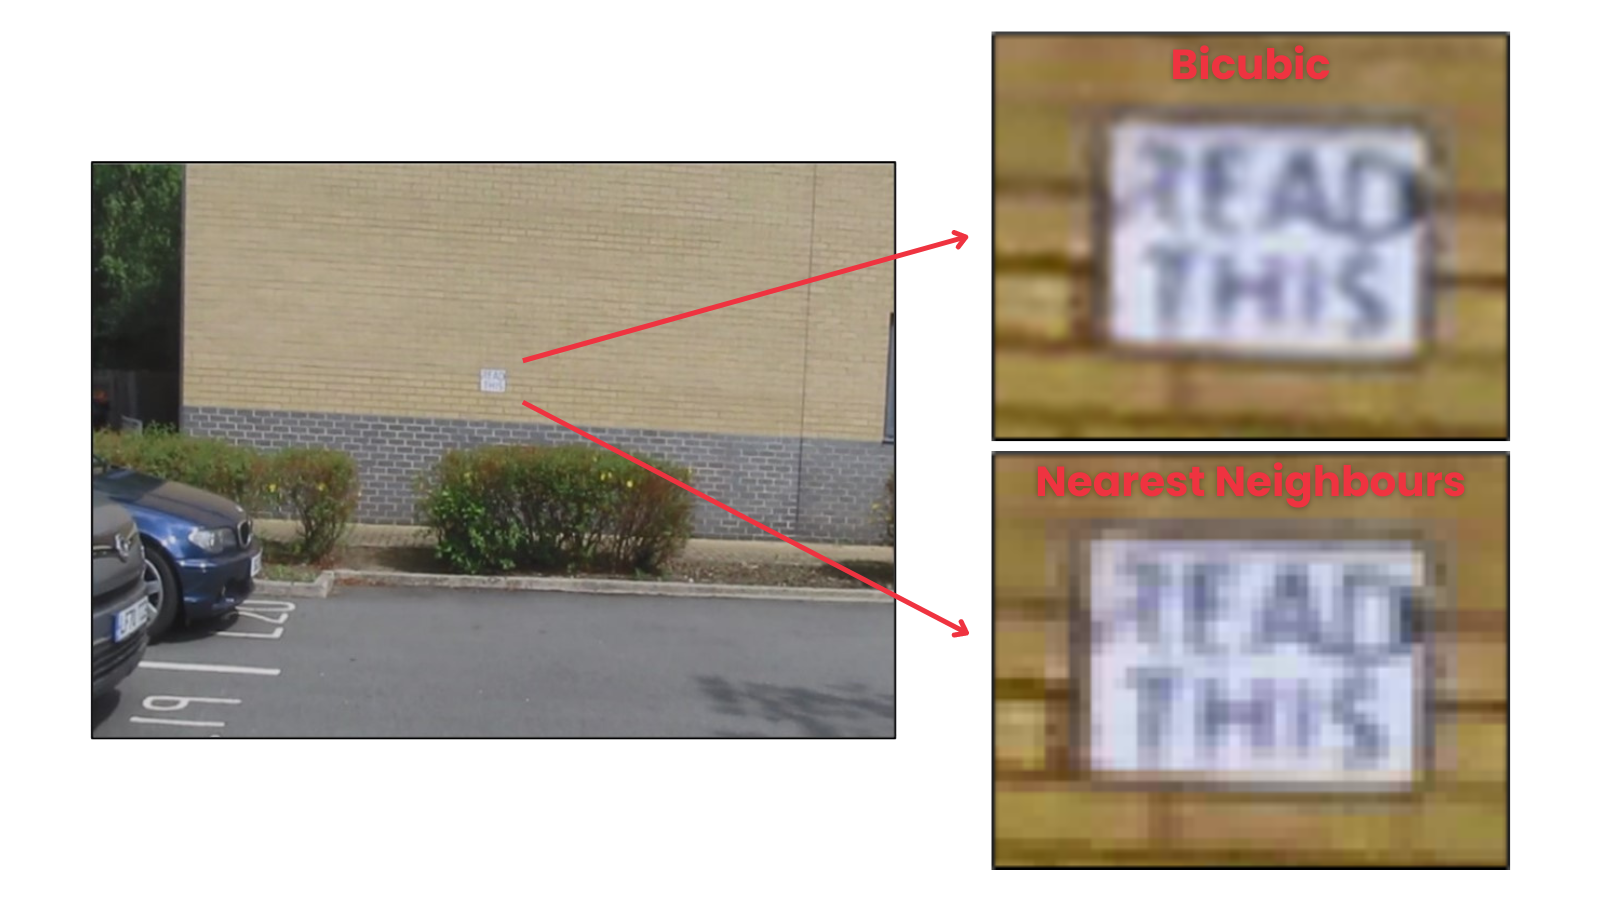 Three images showing different interpolation methods of wall-mounted sign